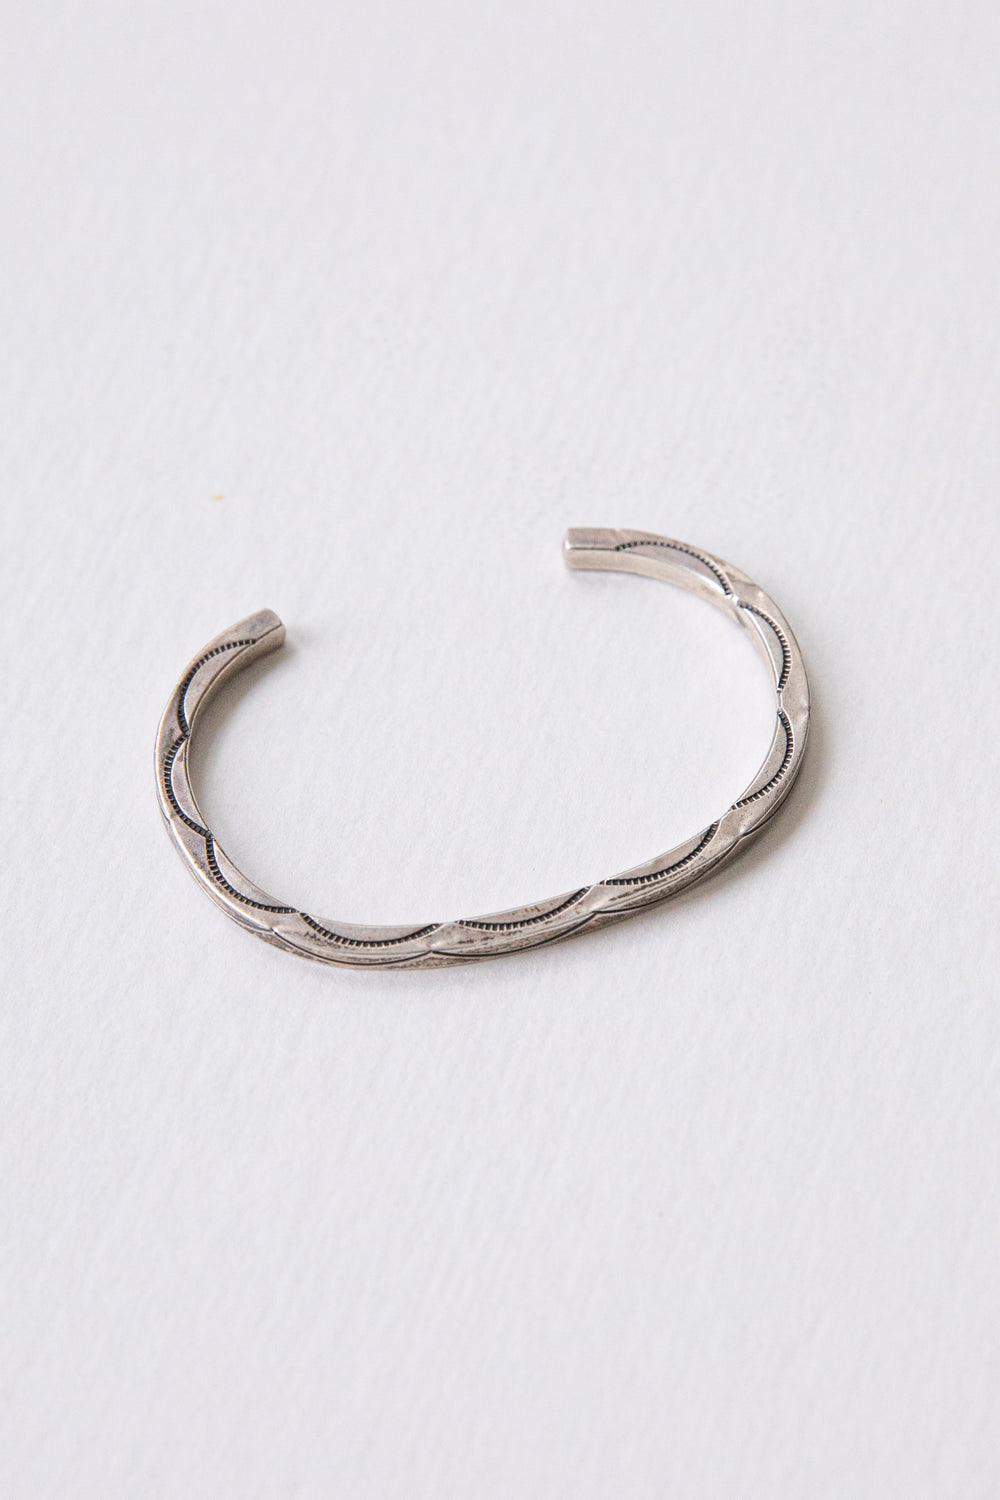 Stamped Arches Sterling Cuff